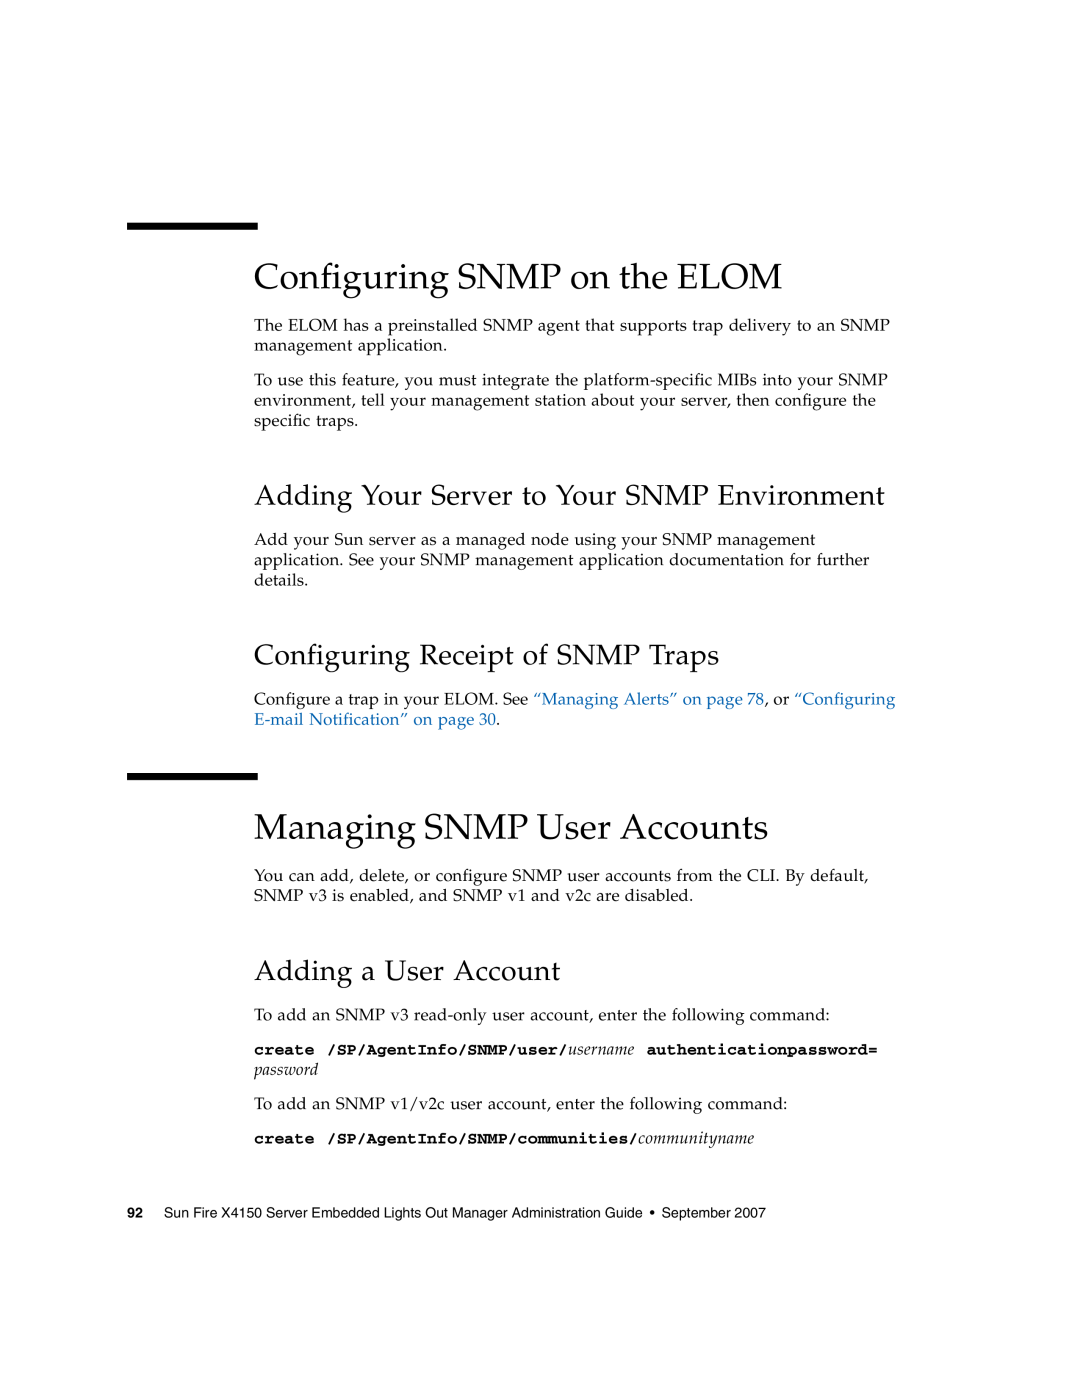 Sun Microsystems X4150 manual Configuring SNMP on the ELOM, Managing SNMP User Accounts, Configuring Receipt of SNMP Traps 